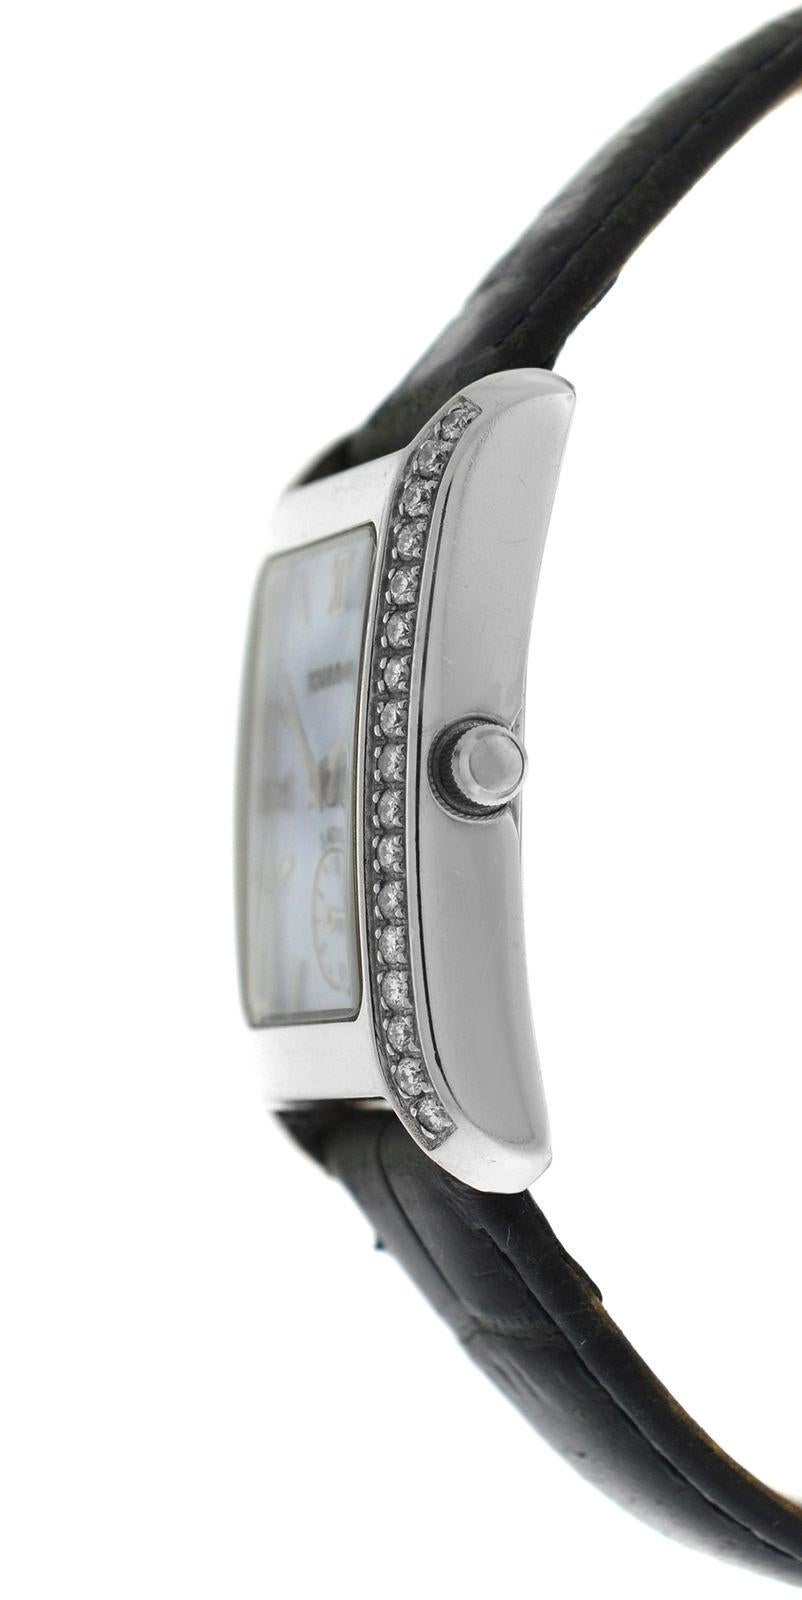 Brand	Tourneau
Model	1064
Gender	Ladies
Condition	Pre-owned
Movement	Swiss Quartz
Case Material	Stainless Steel
Bracelet / Strap Material	
Leather (aftermarket)

Clasp / Buckle Material	
Stainless Steel (aftermarket)

Clasp Type	Tang
Bracelet /